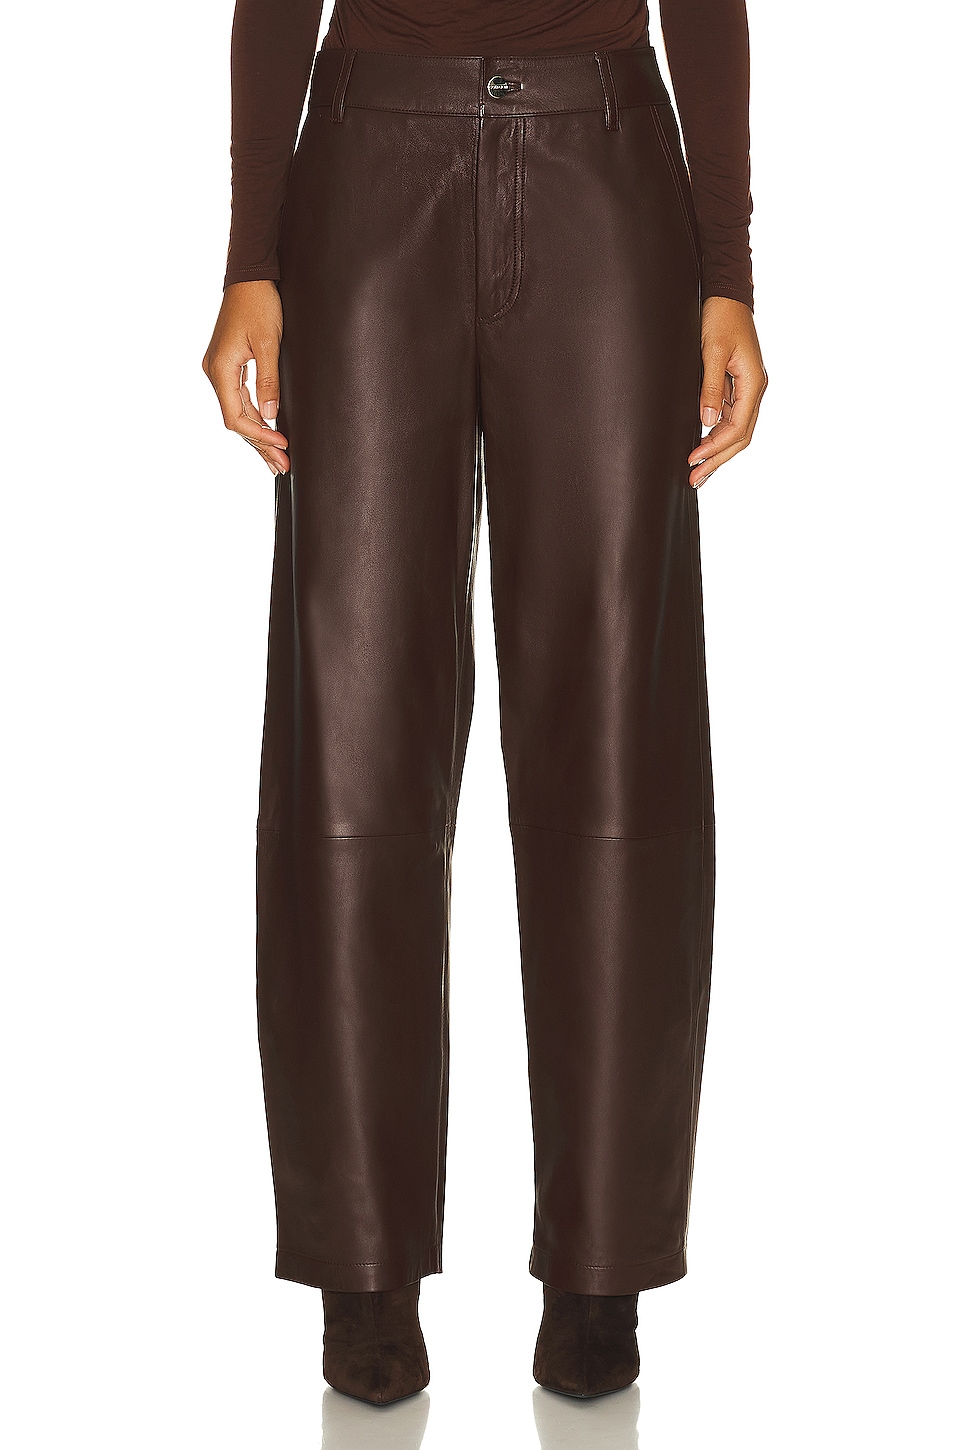 Trey Leather Trouser in Brown